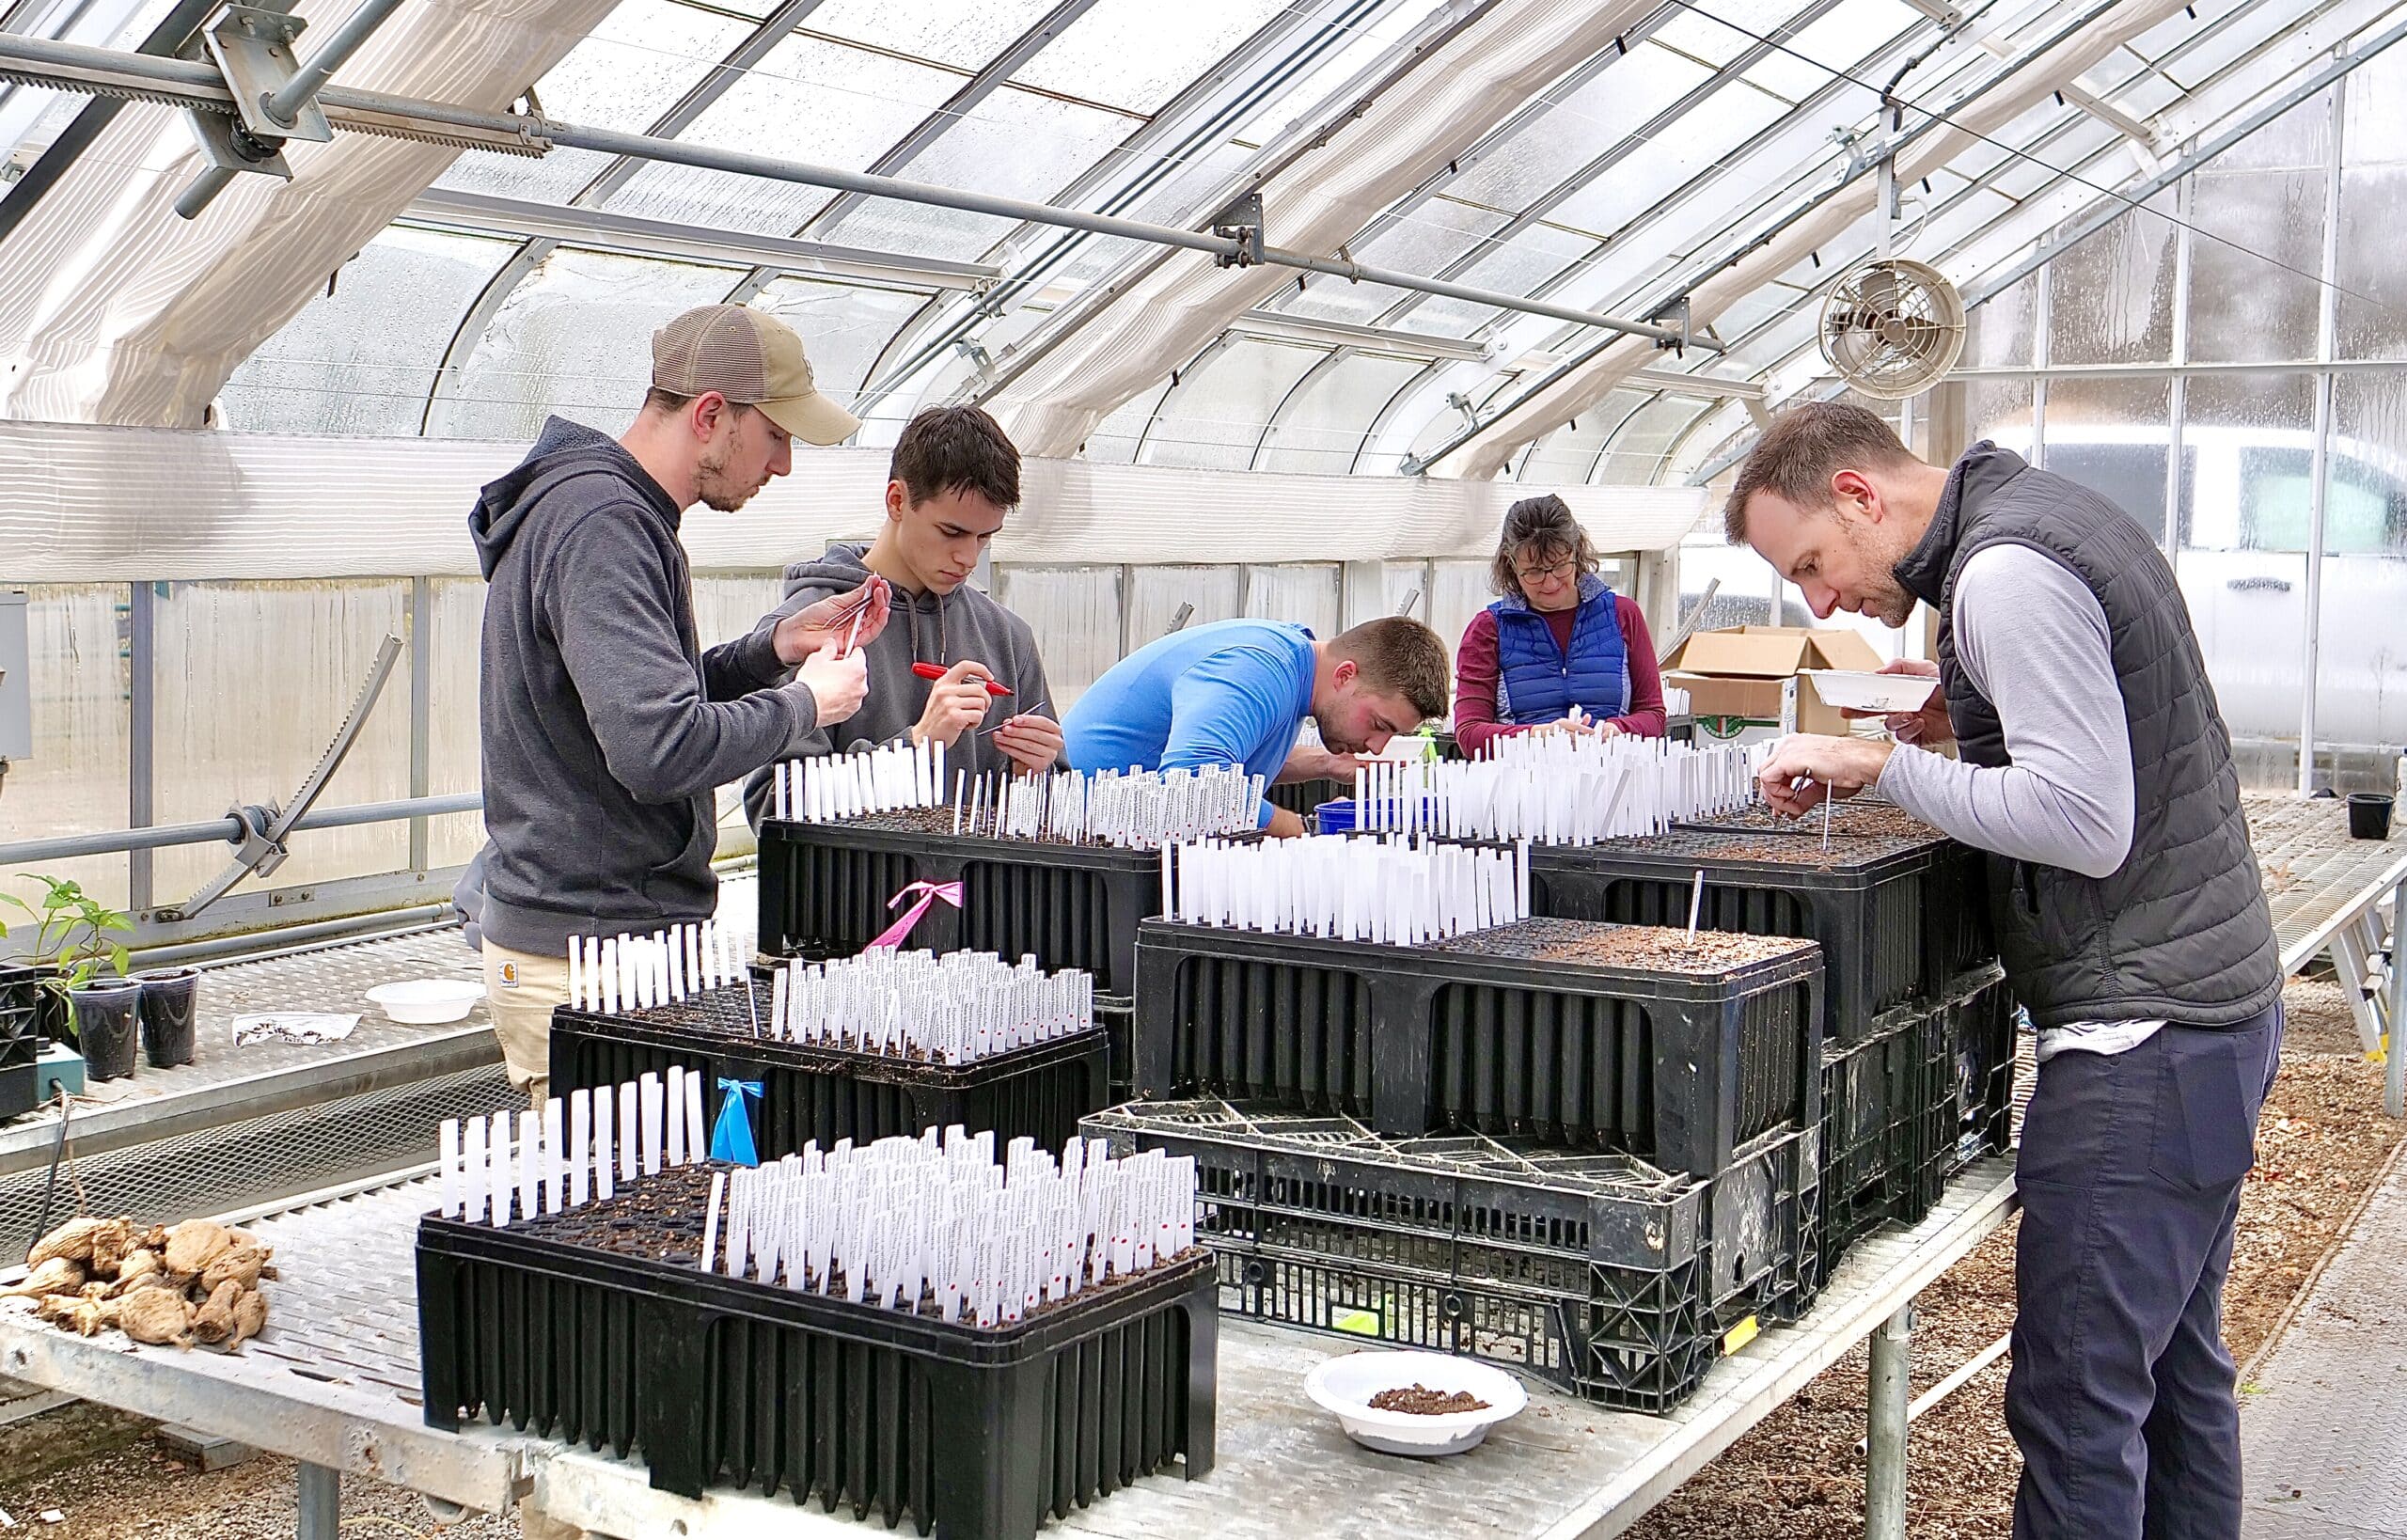 Greenacres research team planting seeds in greenhouse